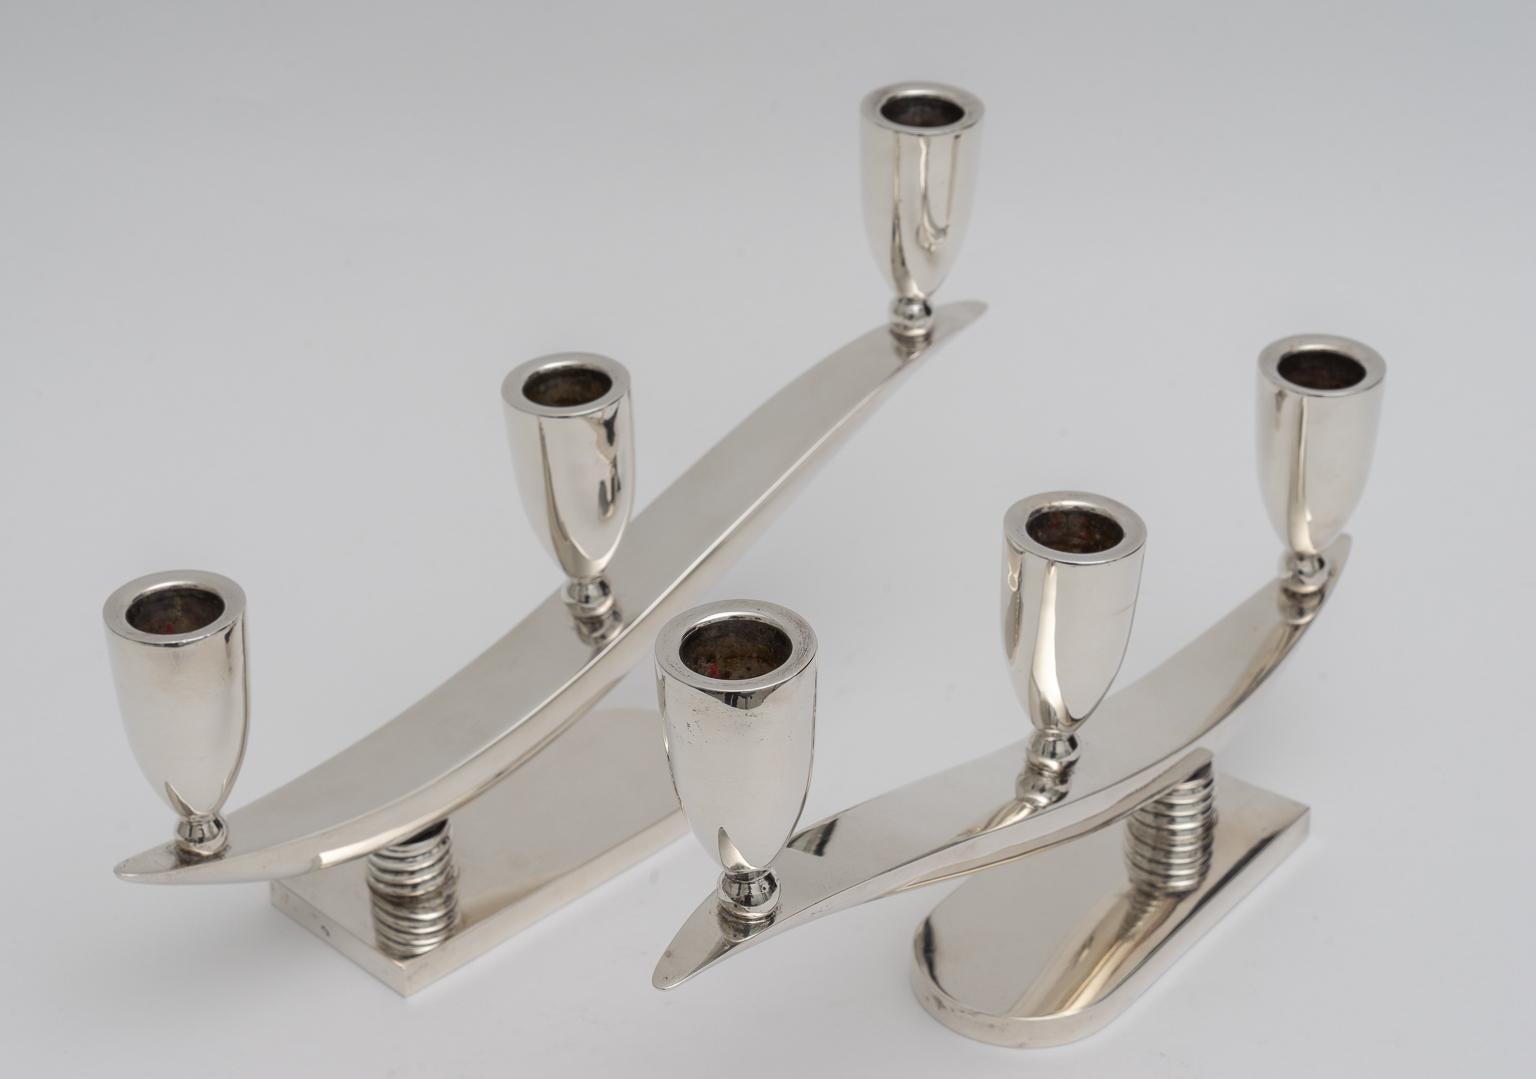 This stylish Moderne, Art Deco set of sterling silver candleholders are very much in the style of pieces created by Georg Jensen in the early 20th century. This set is by the firm MRN of Mexico.

Note: Makers mark on the Verso of the pieces (see